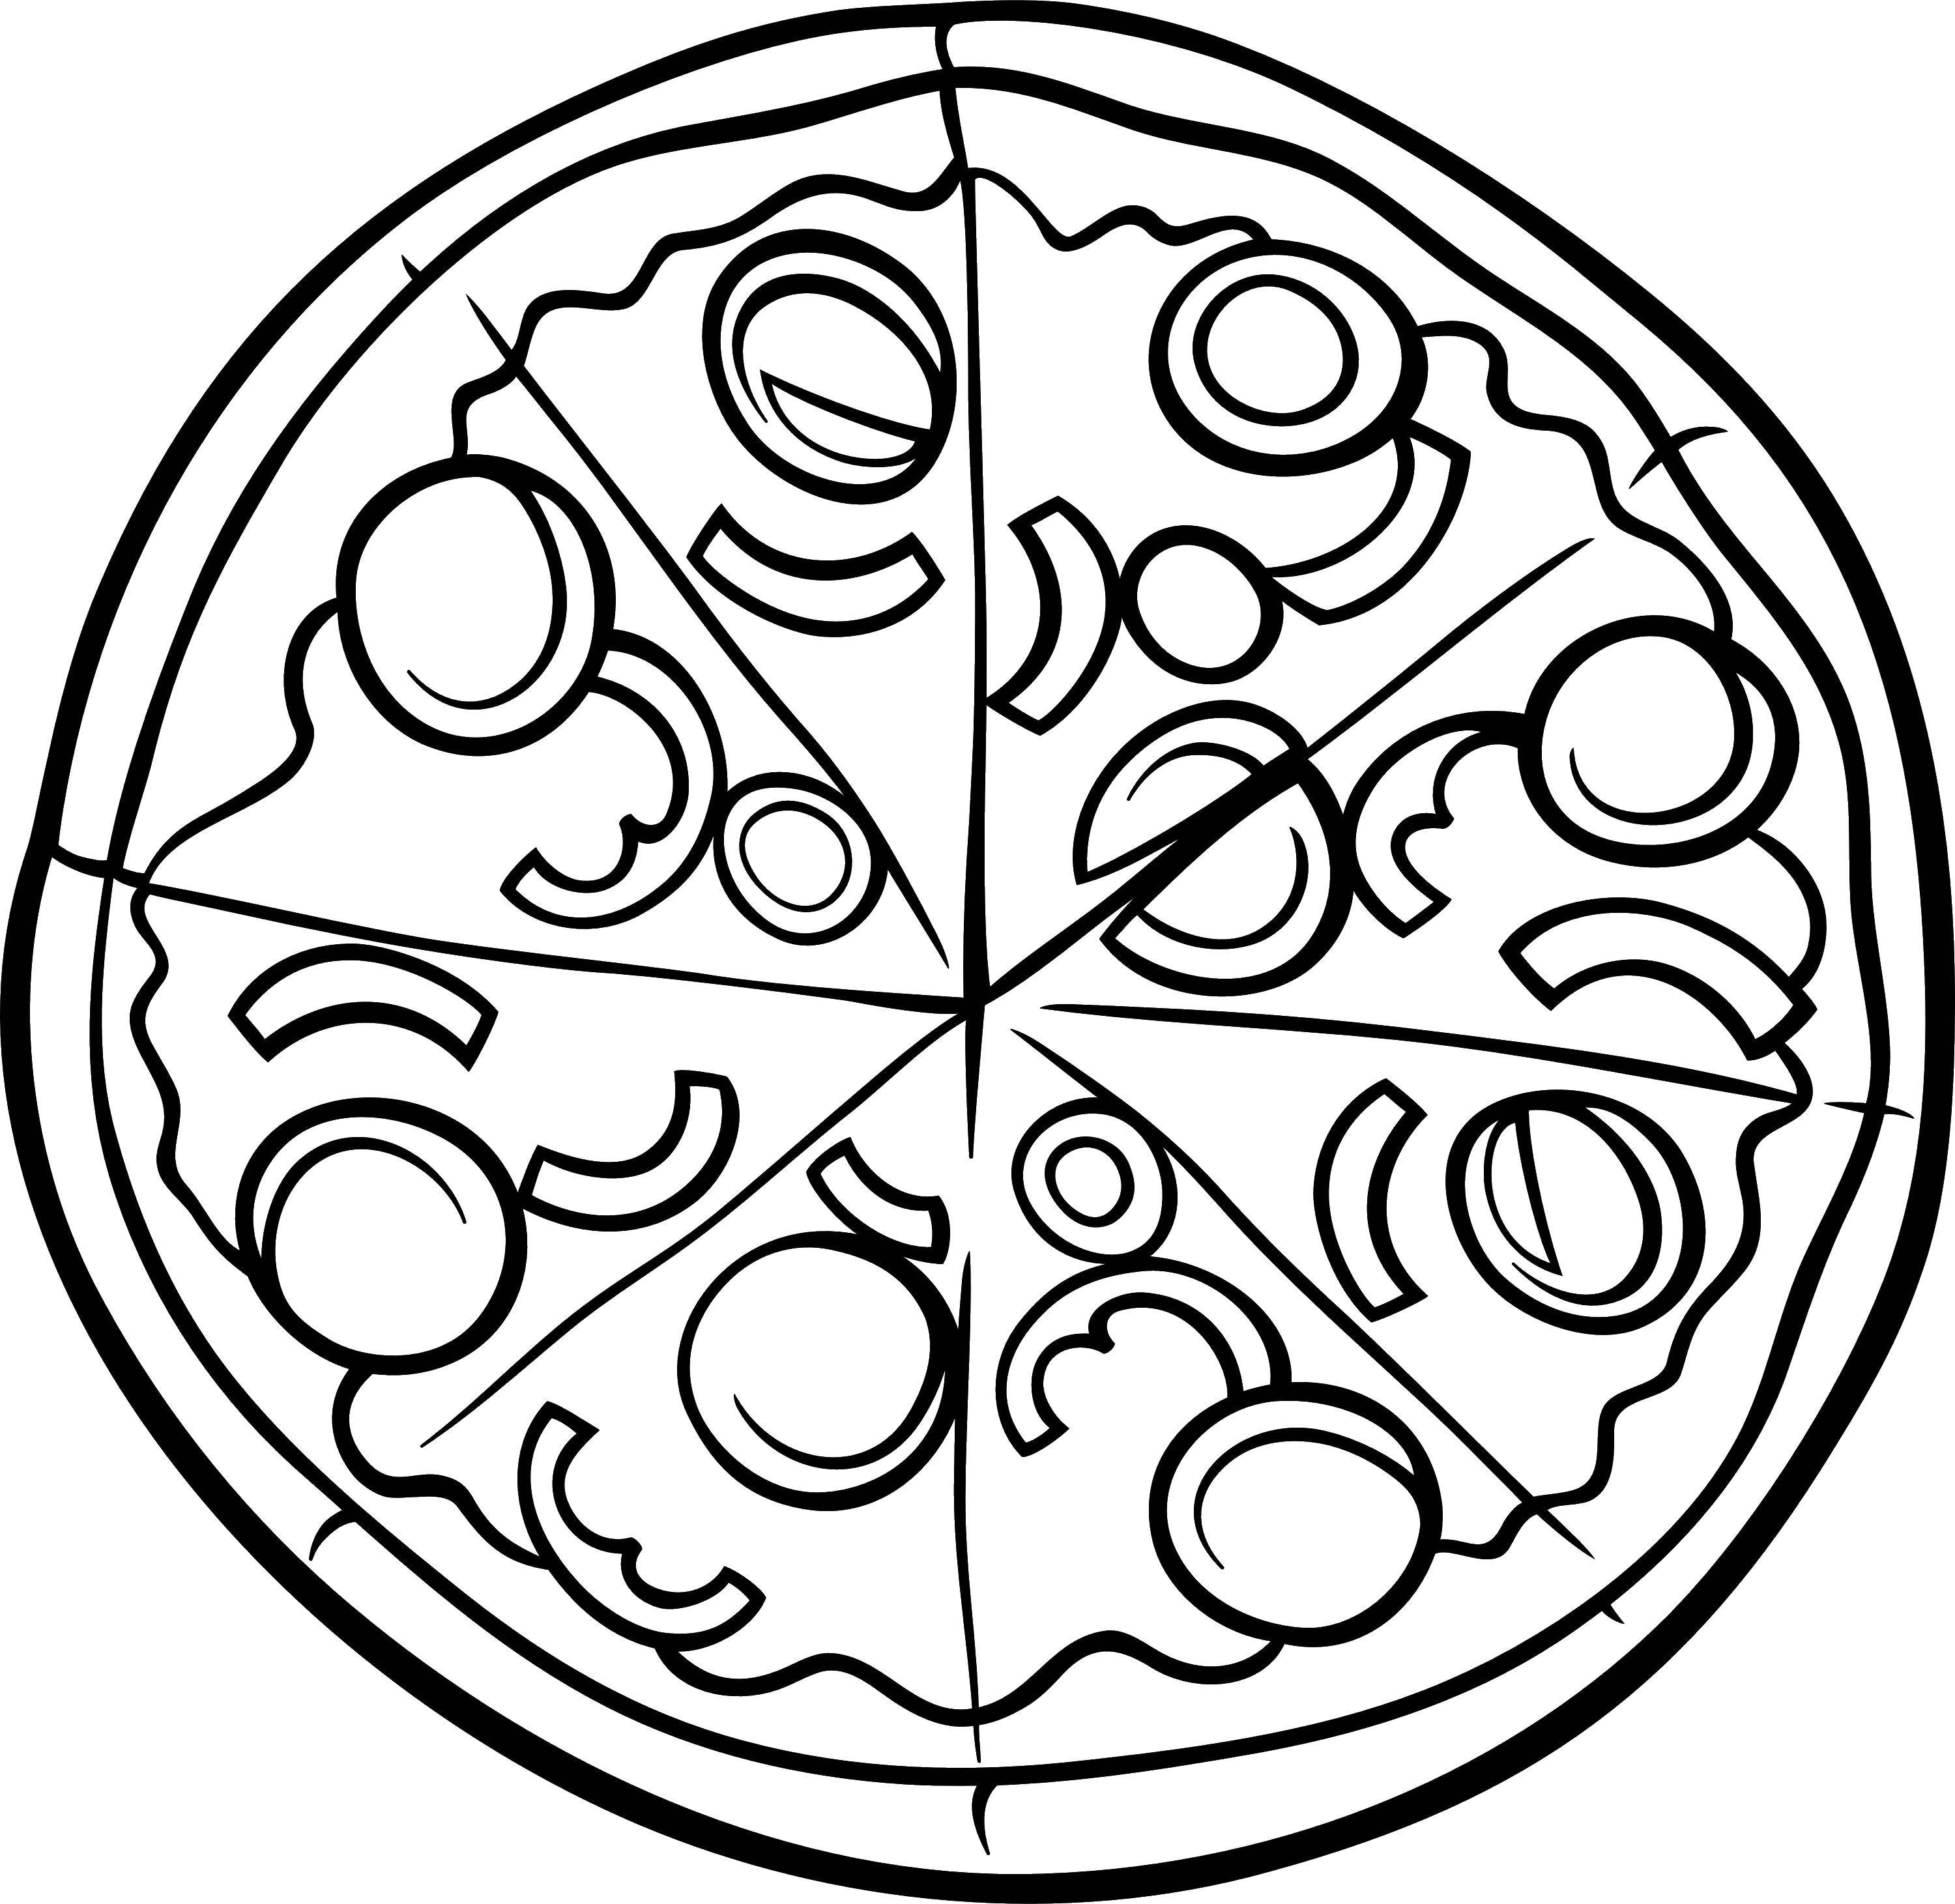 Coloring Pizza. Category The food. Tags:  pizza, food.